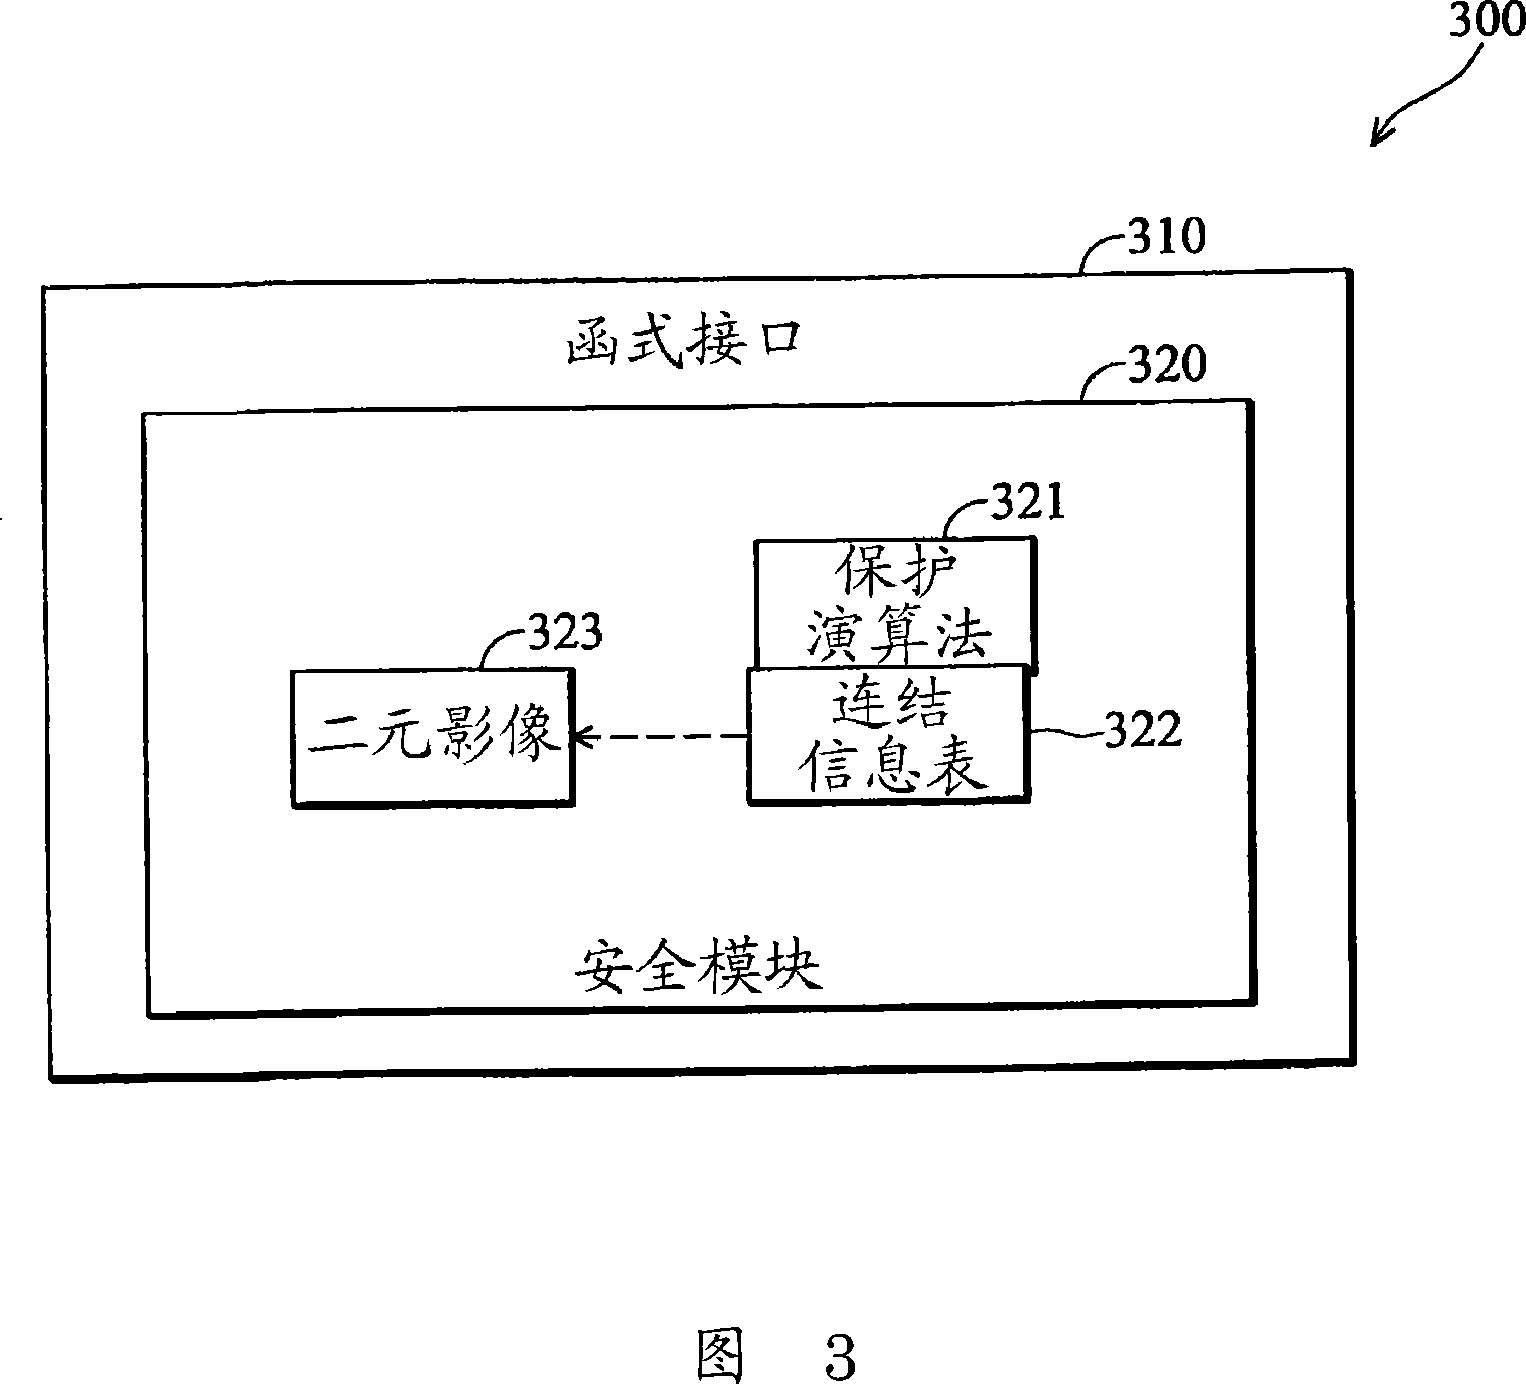 Applied program processing method and system